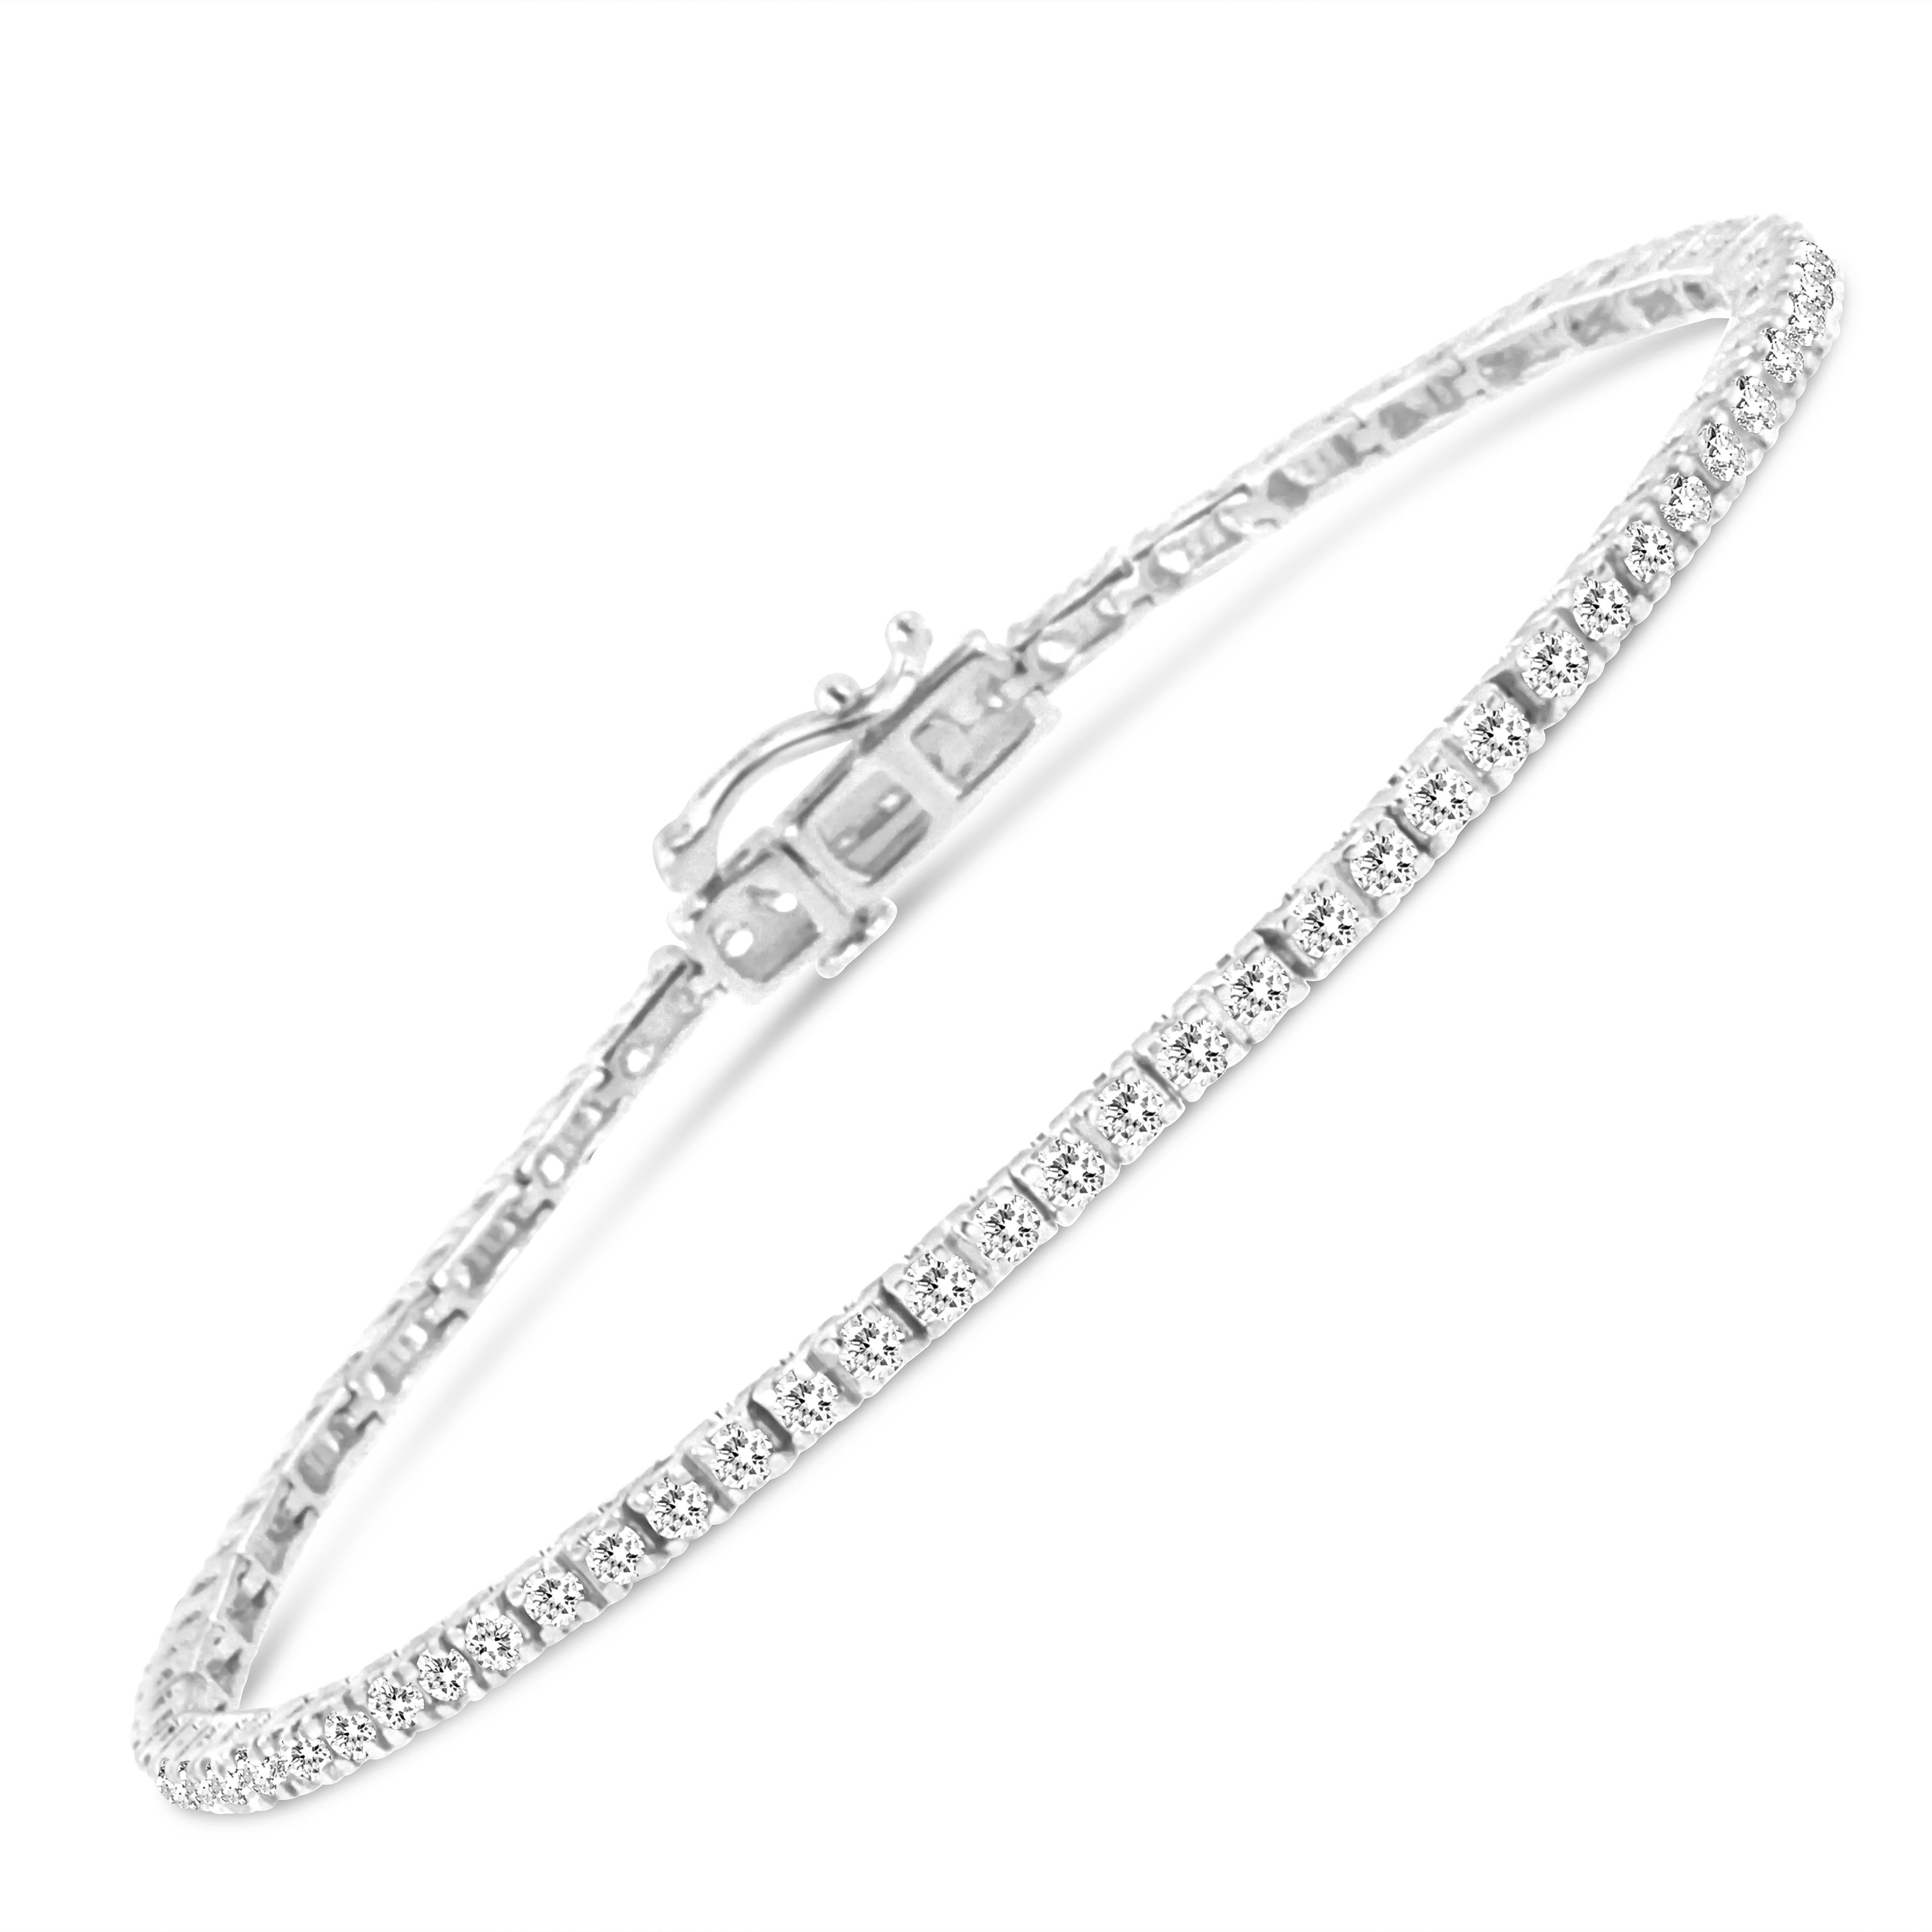 Elegant and timeless, this gorgeous 92.5% sterling silver tennis bracelet features 2.0 carat total weight of natural round brilliant cut white diamonds with a whopping 78 individual stones in all. The tennis bracelet has hinged links consisting of